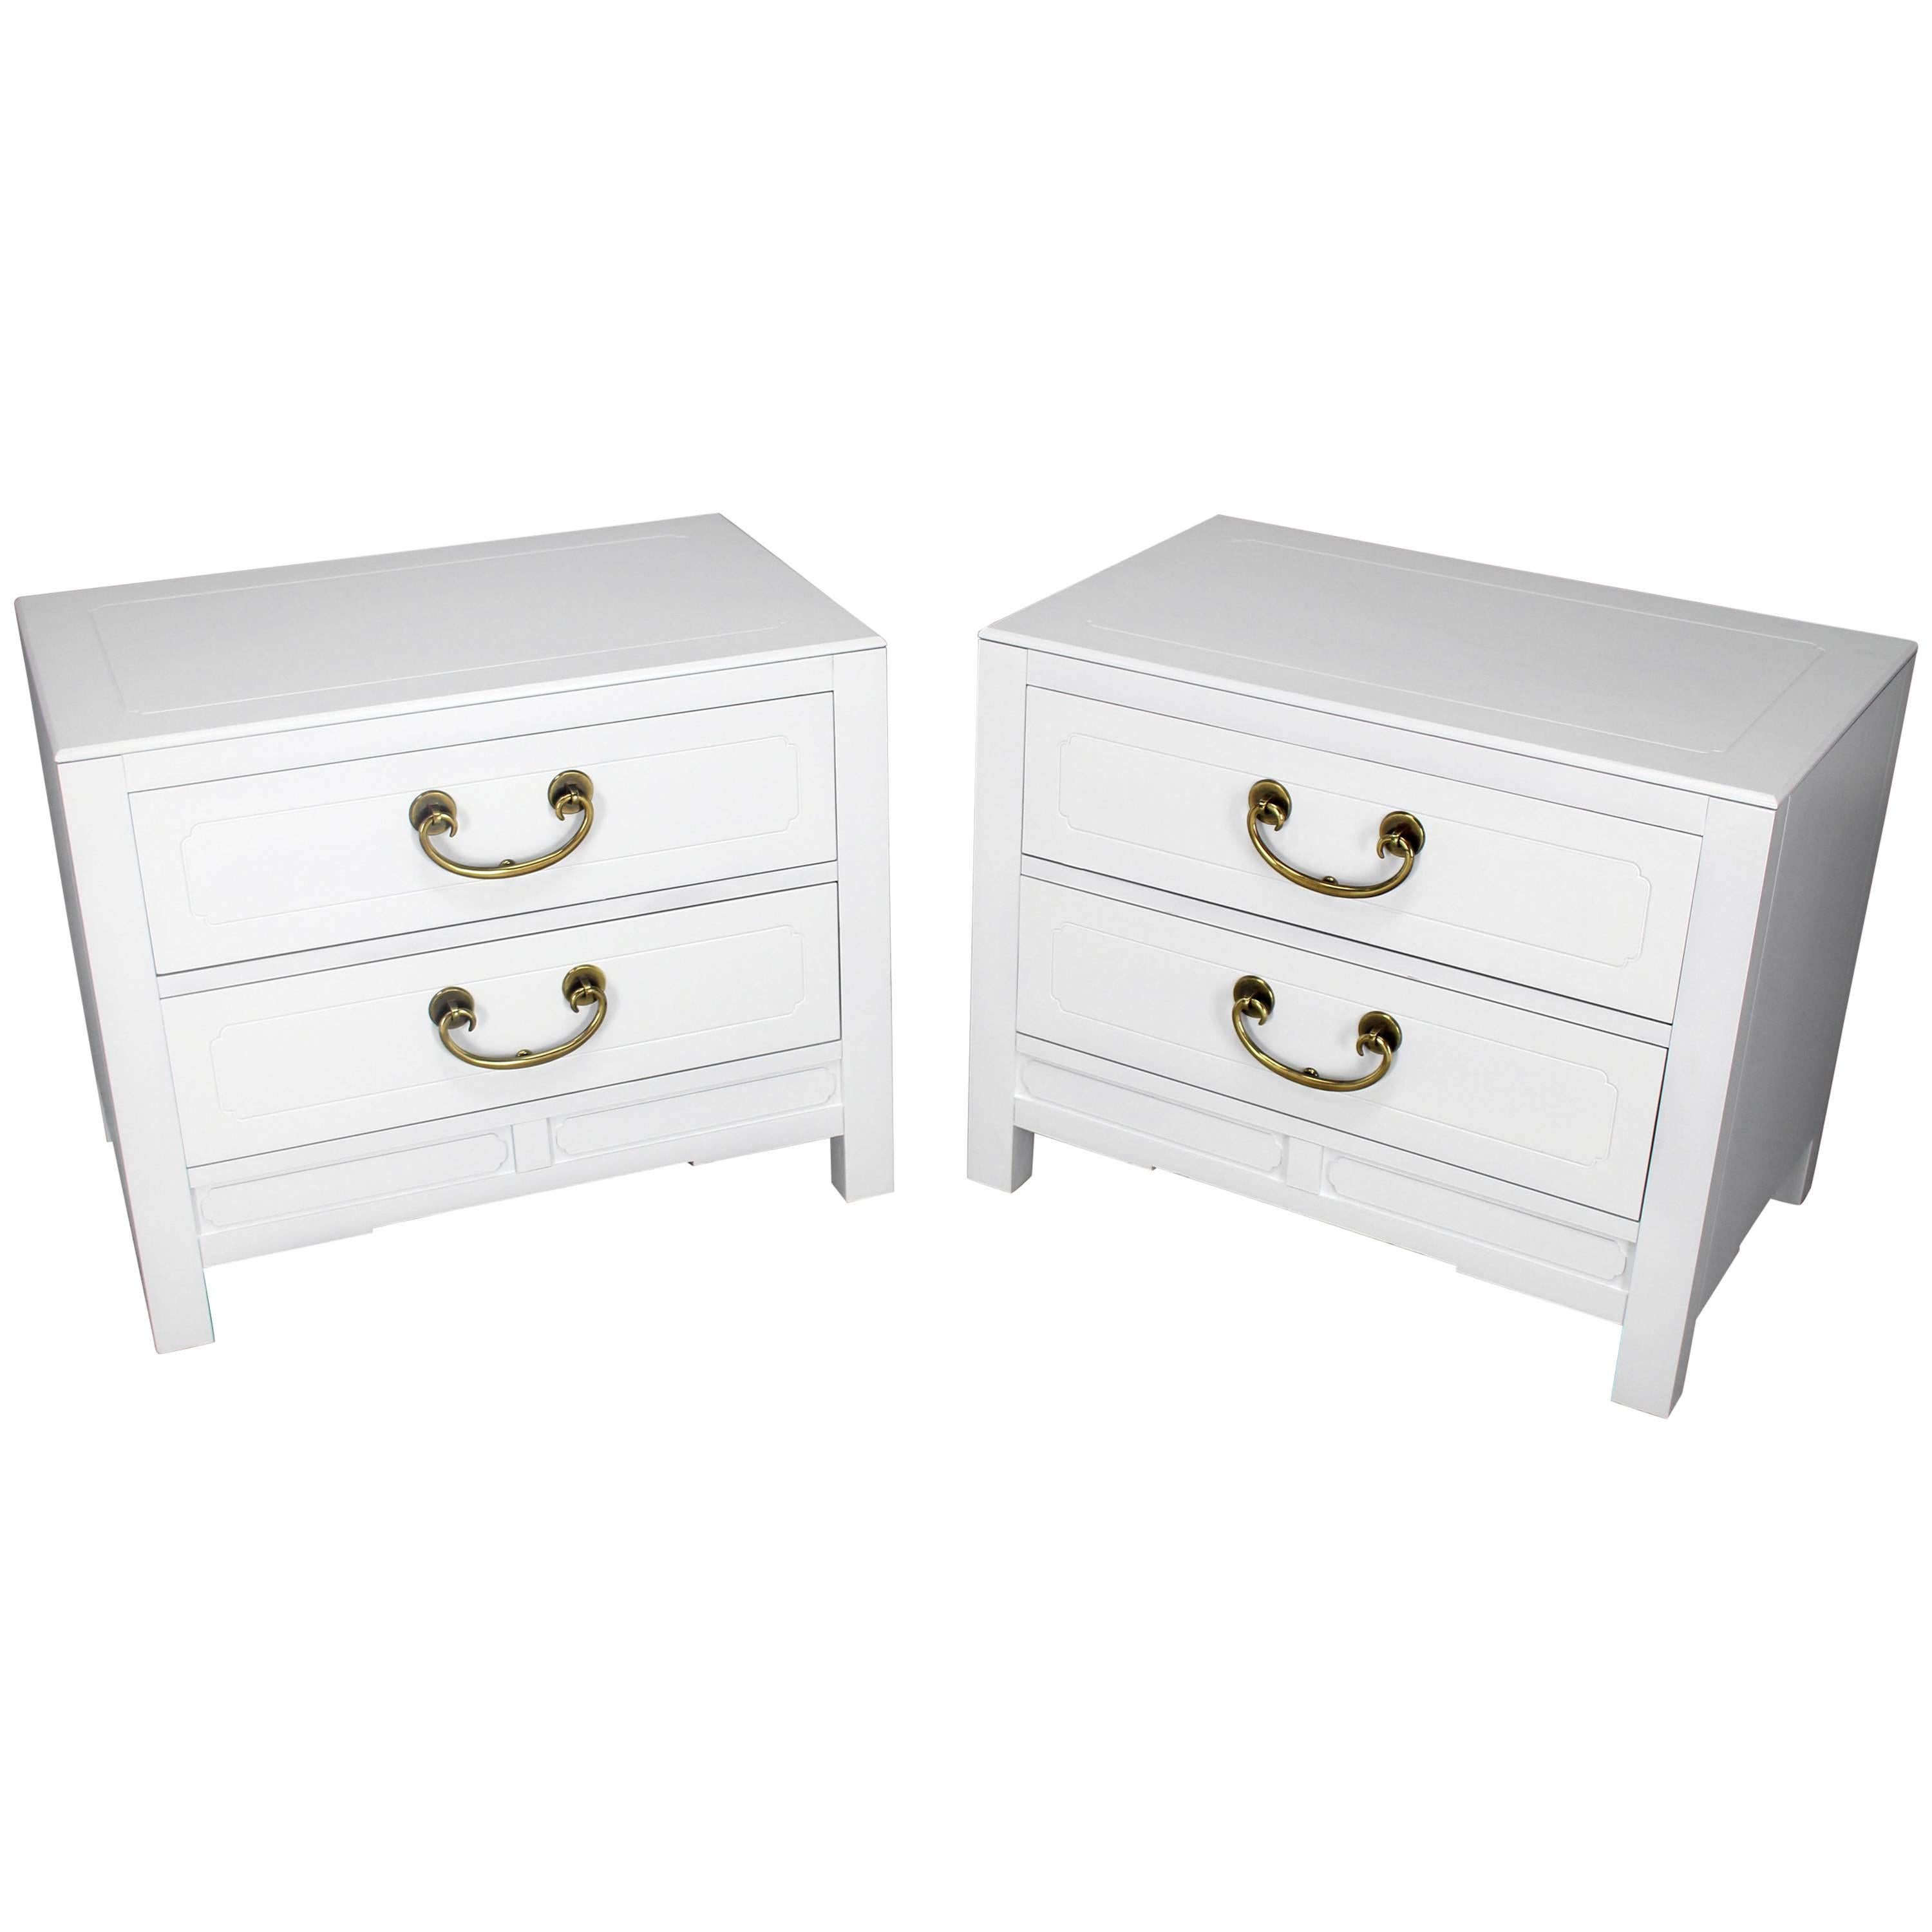 Pair of White Lacquer Brass Hardware Two-Drawer Cabinets or End Tables For Sale